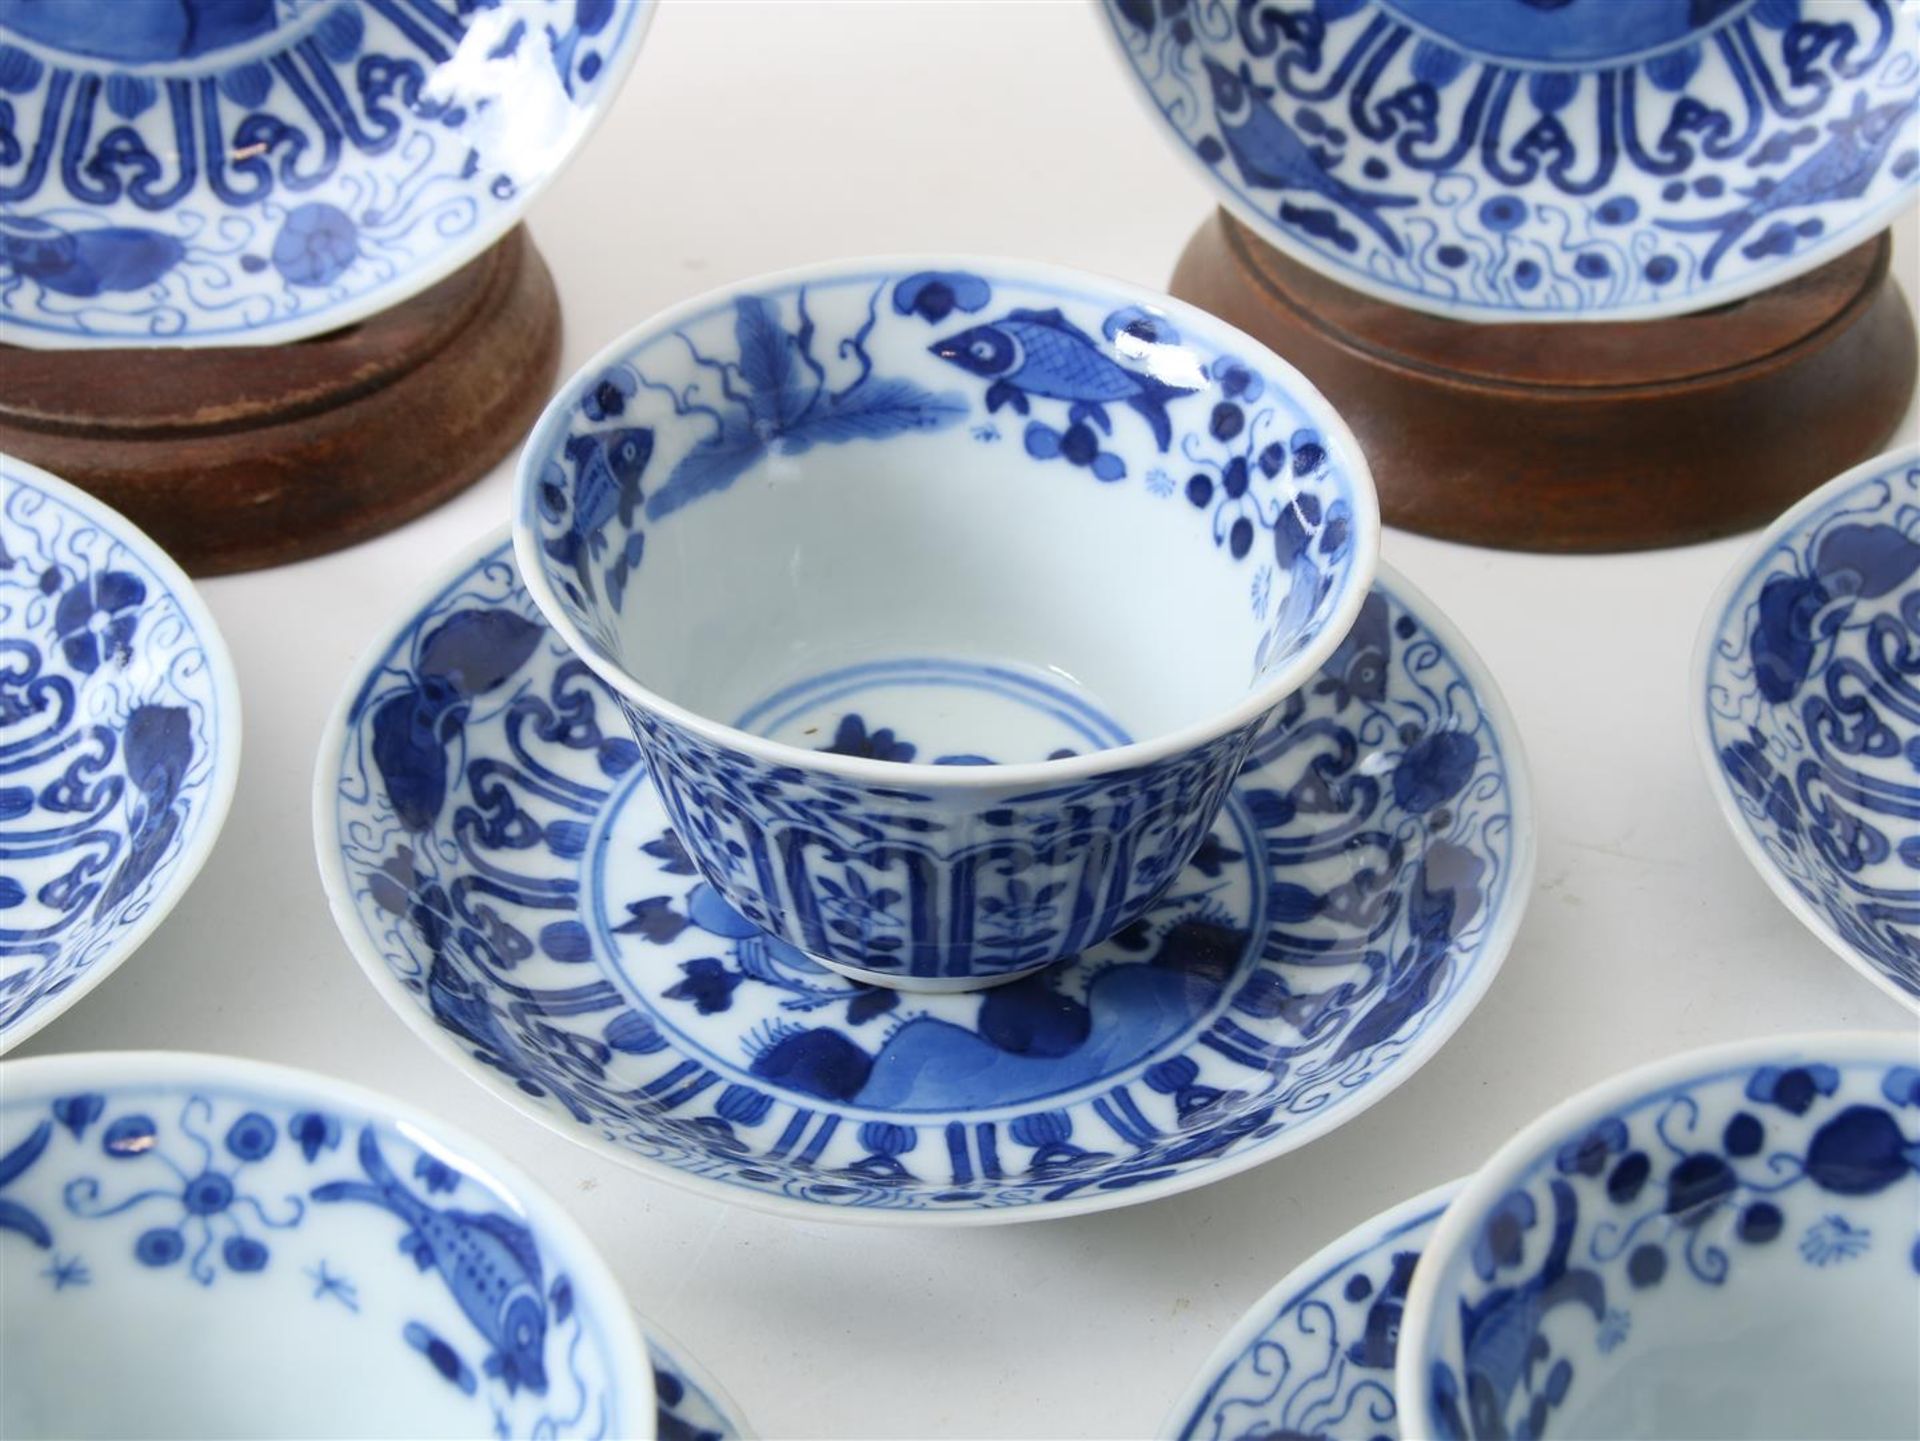 Lot of 12 porcelain cups and 11 saucers decorated in blue with perch and butterfly decor, China - Image 12 of 19